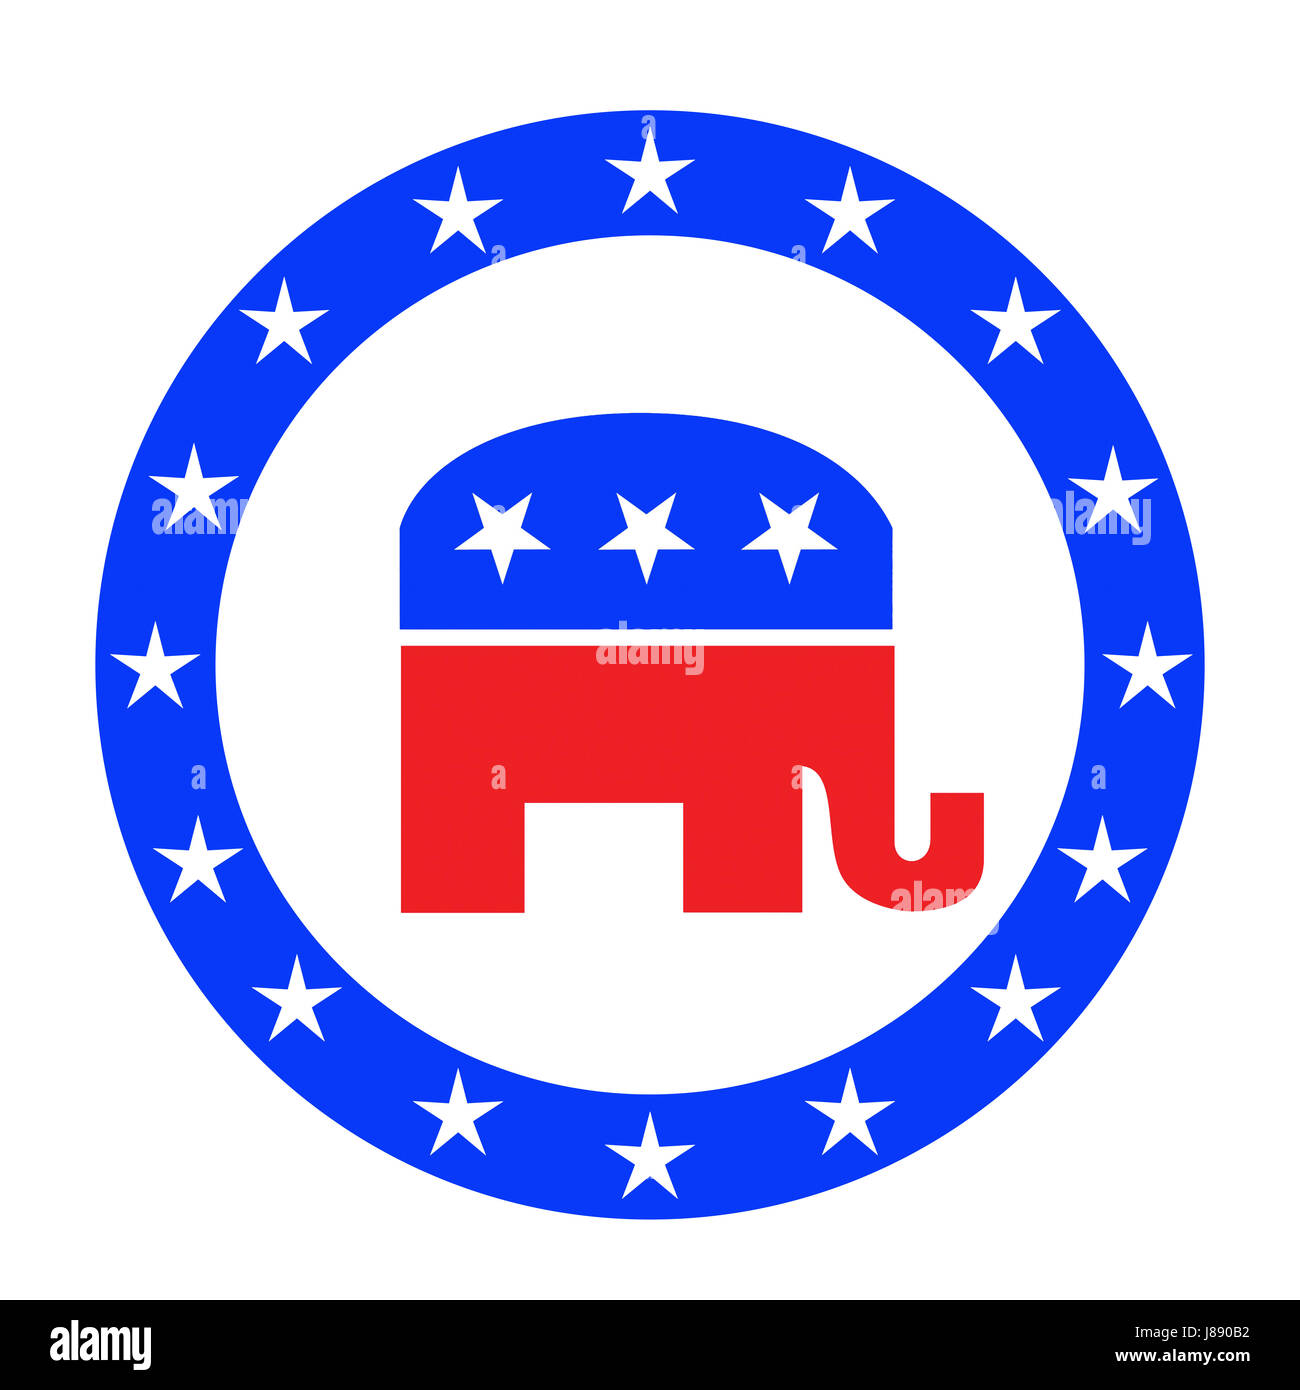 america, vote, voting, party, election, choosing, republican, blue, political, Stock Photo